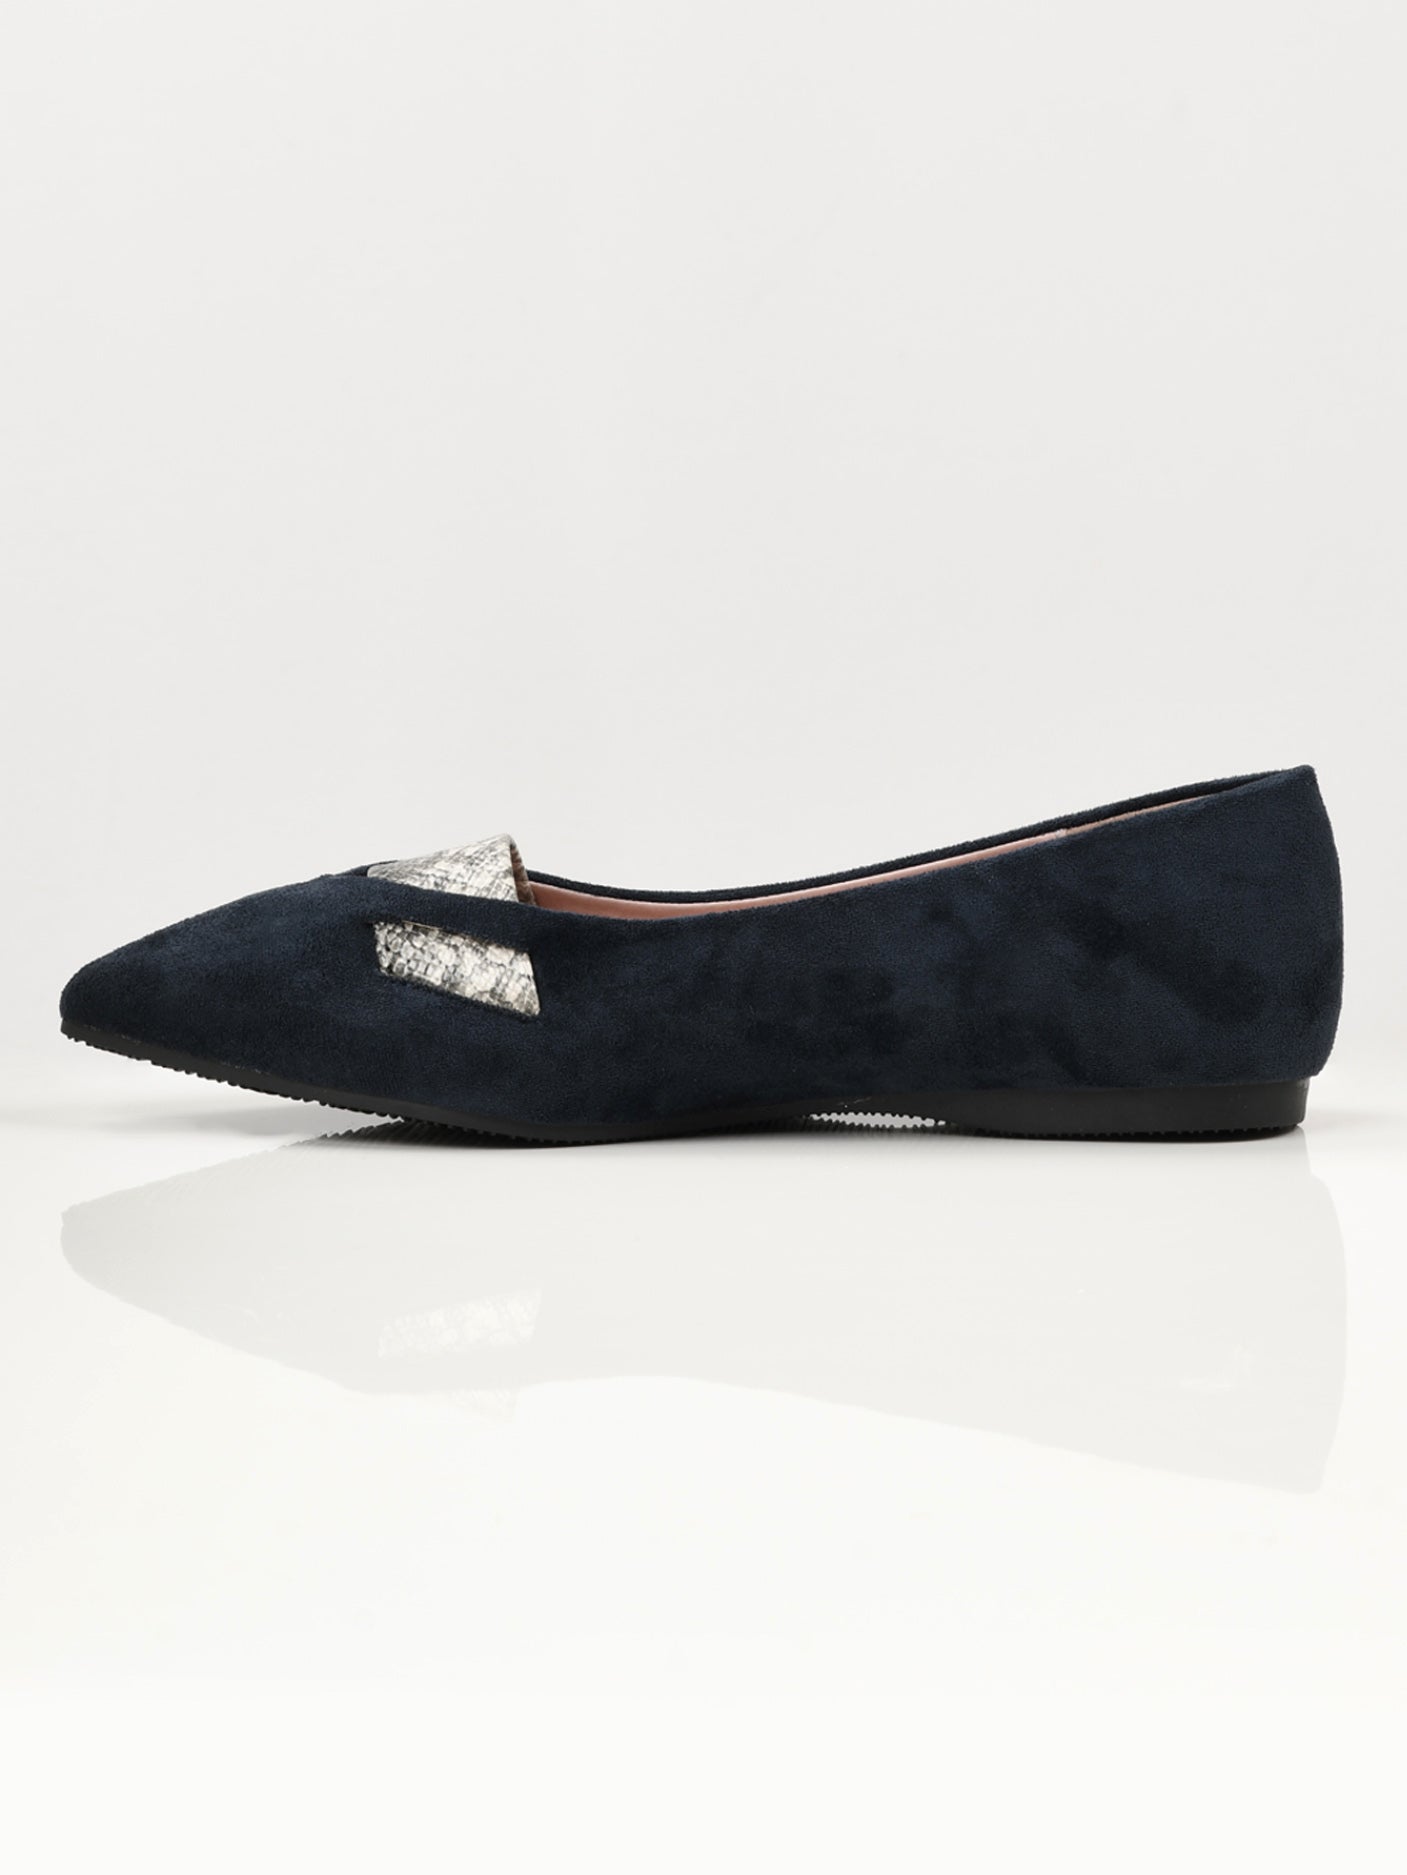 Printed Stripe Shoes - Navy Blue